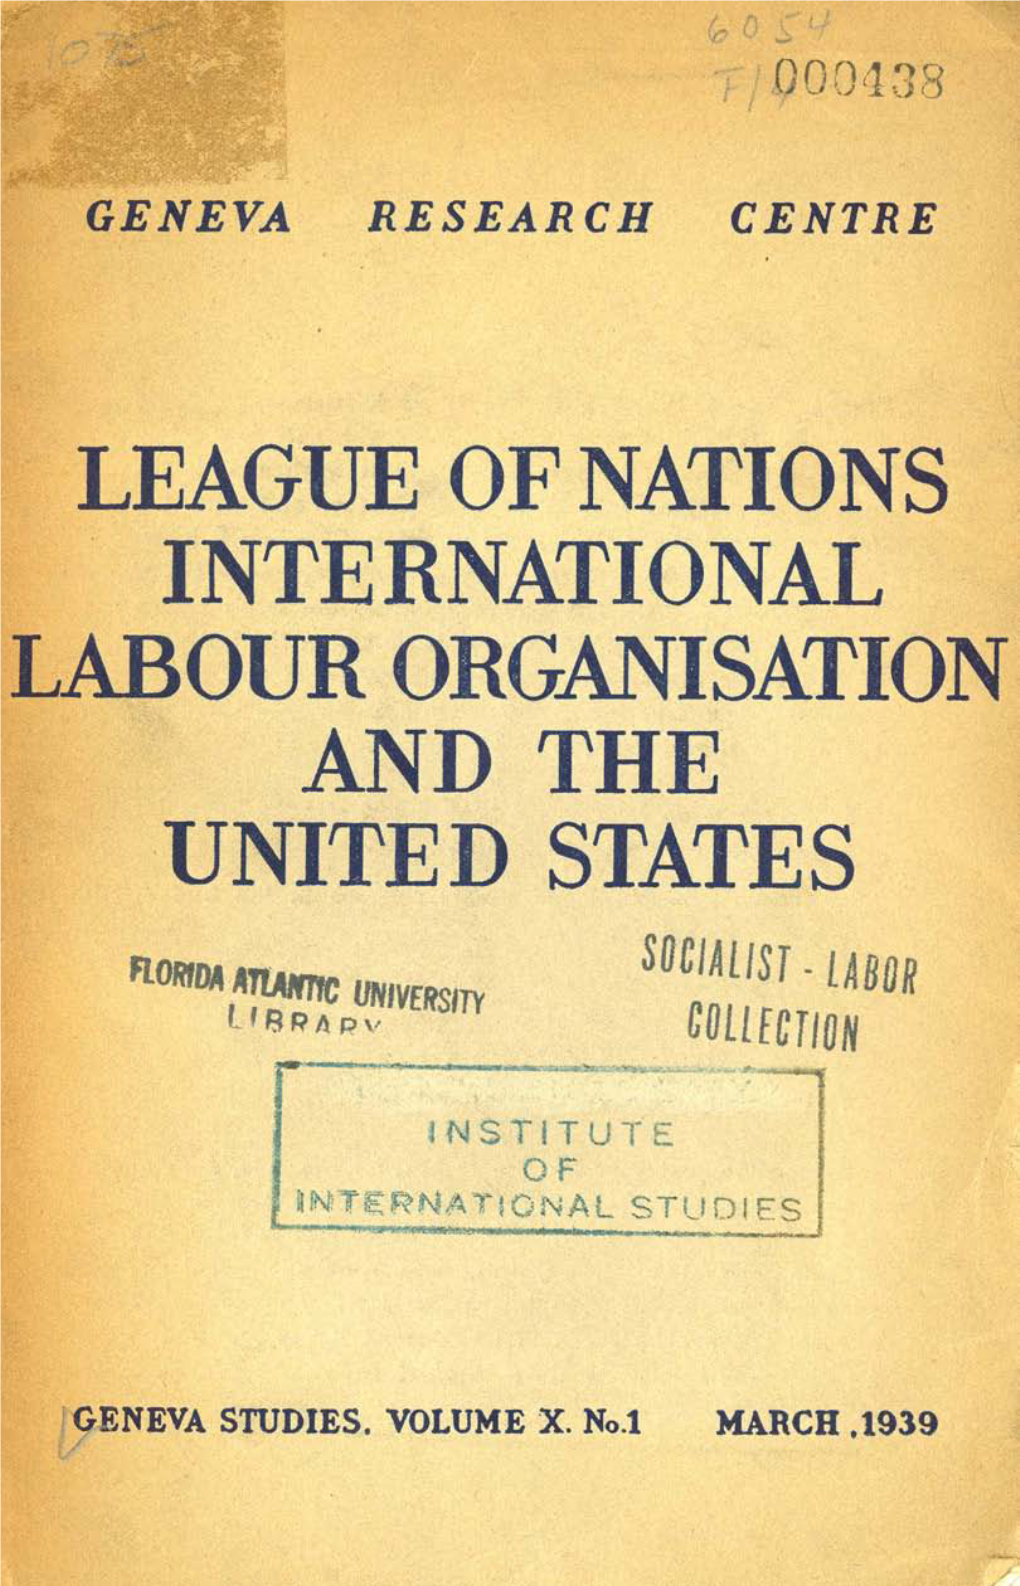 LEAGUE of NATIONS . INTERNATIONAL LABOUR ORGANISATION and the UNITED STATES SOCIALIST - LABOR Florida Taltannc UNIVERSITY '8RARV COLLECTION